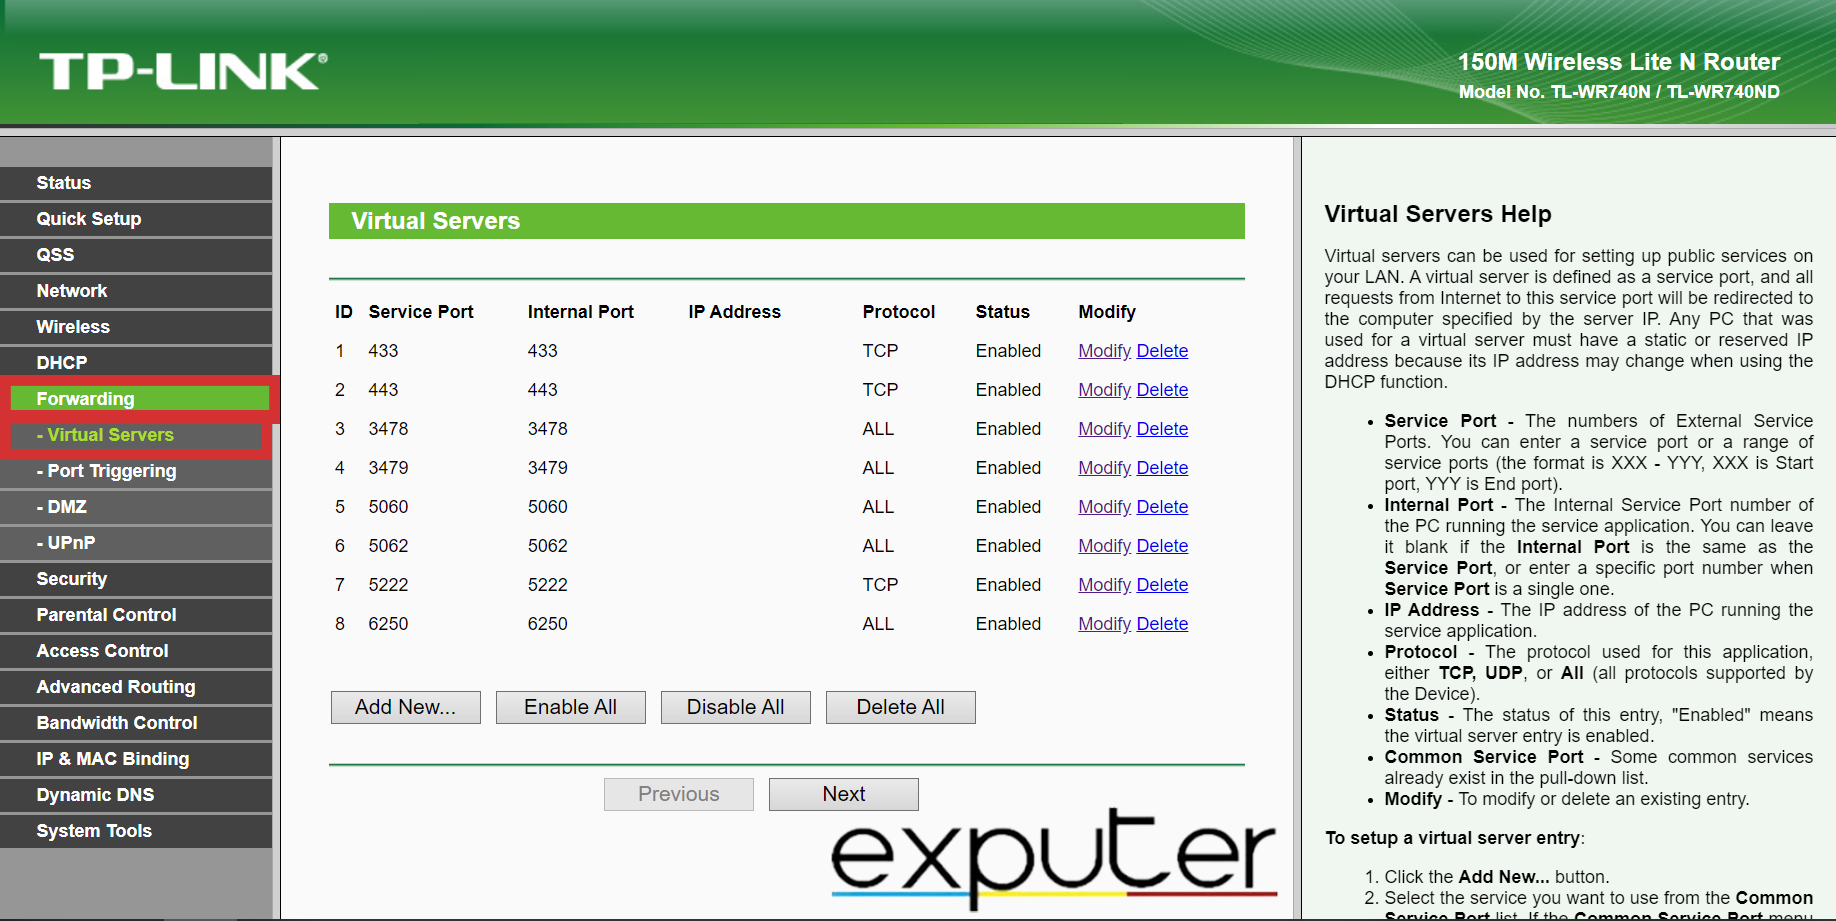 Opening Port Forwarding/Virtual Servers Settings in TP-LINK Router Settings. (image captured by eXputer)